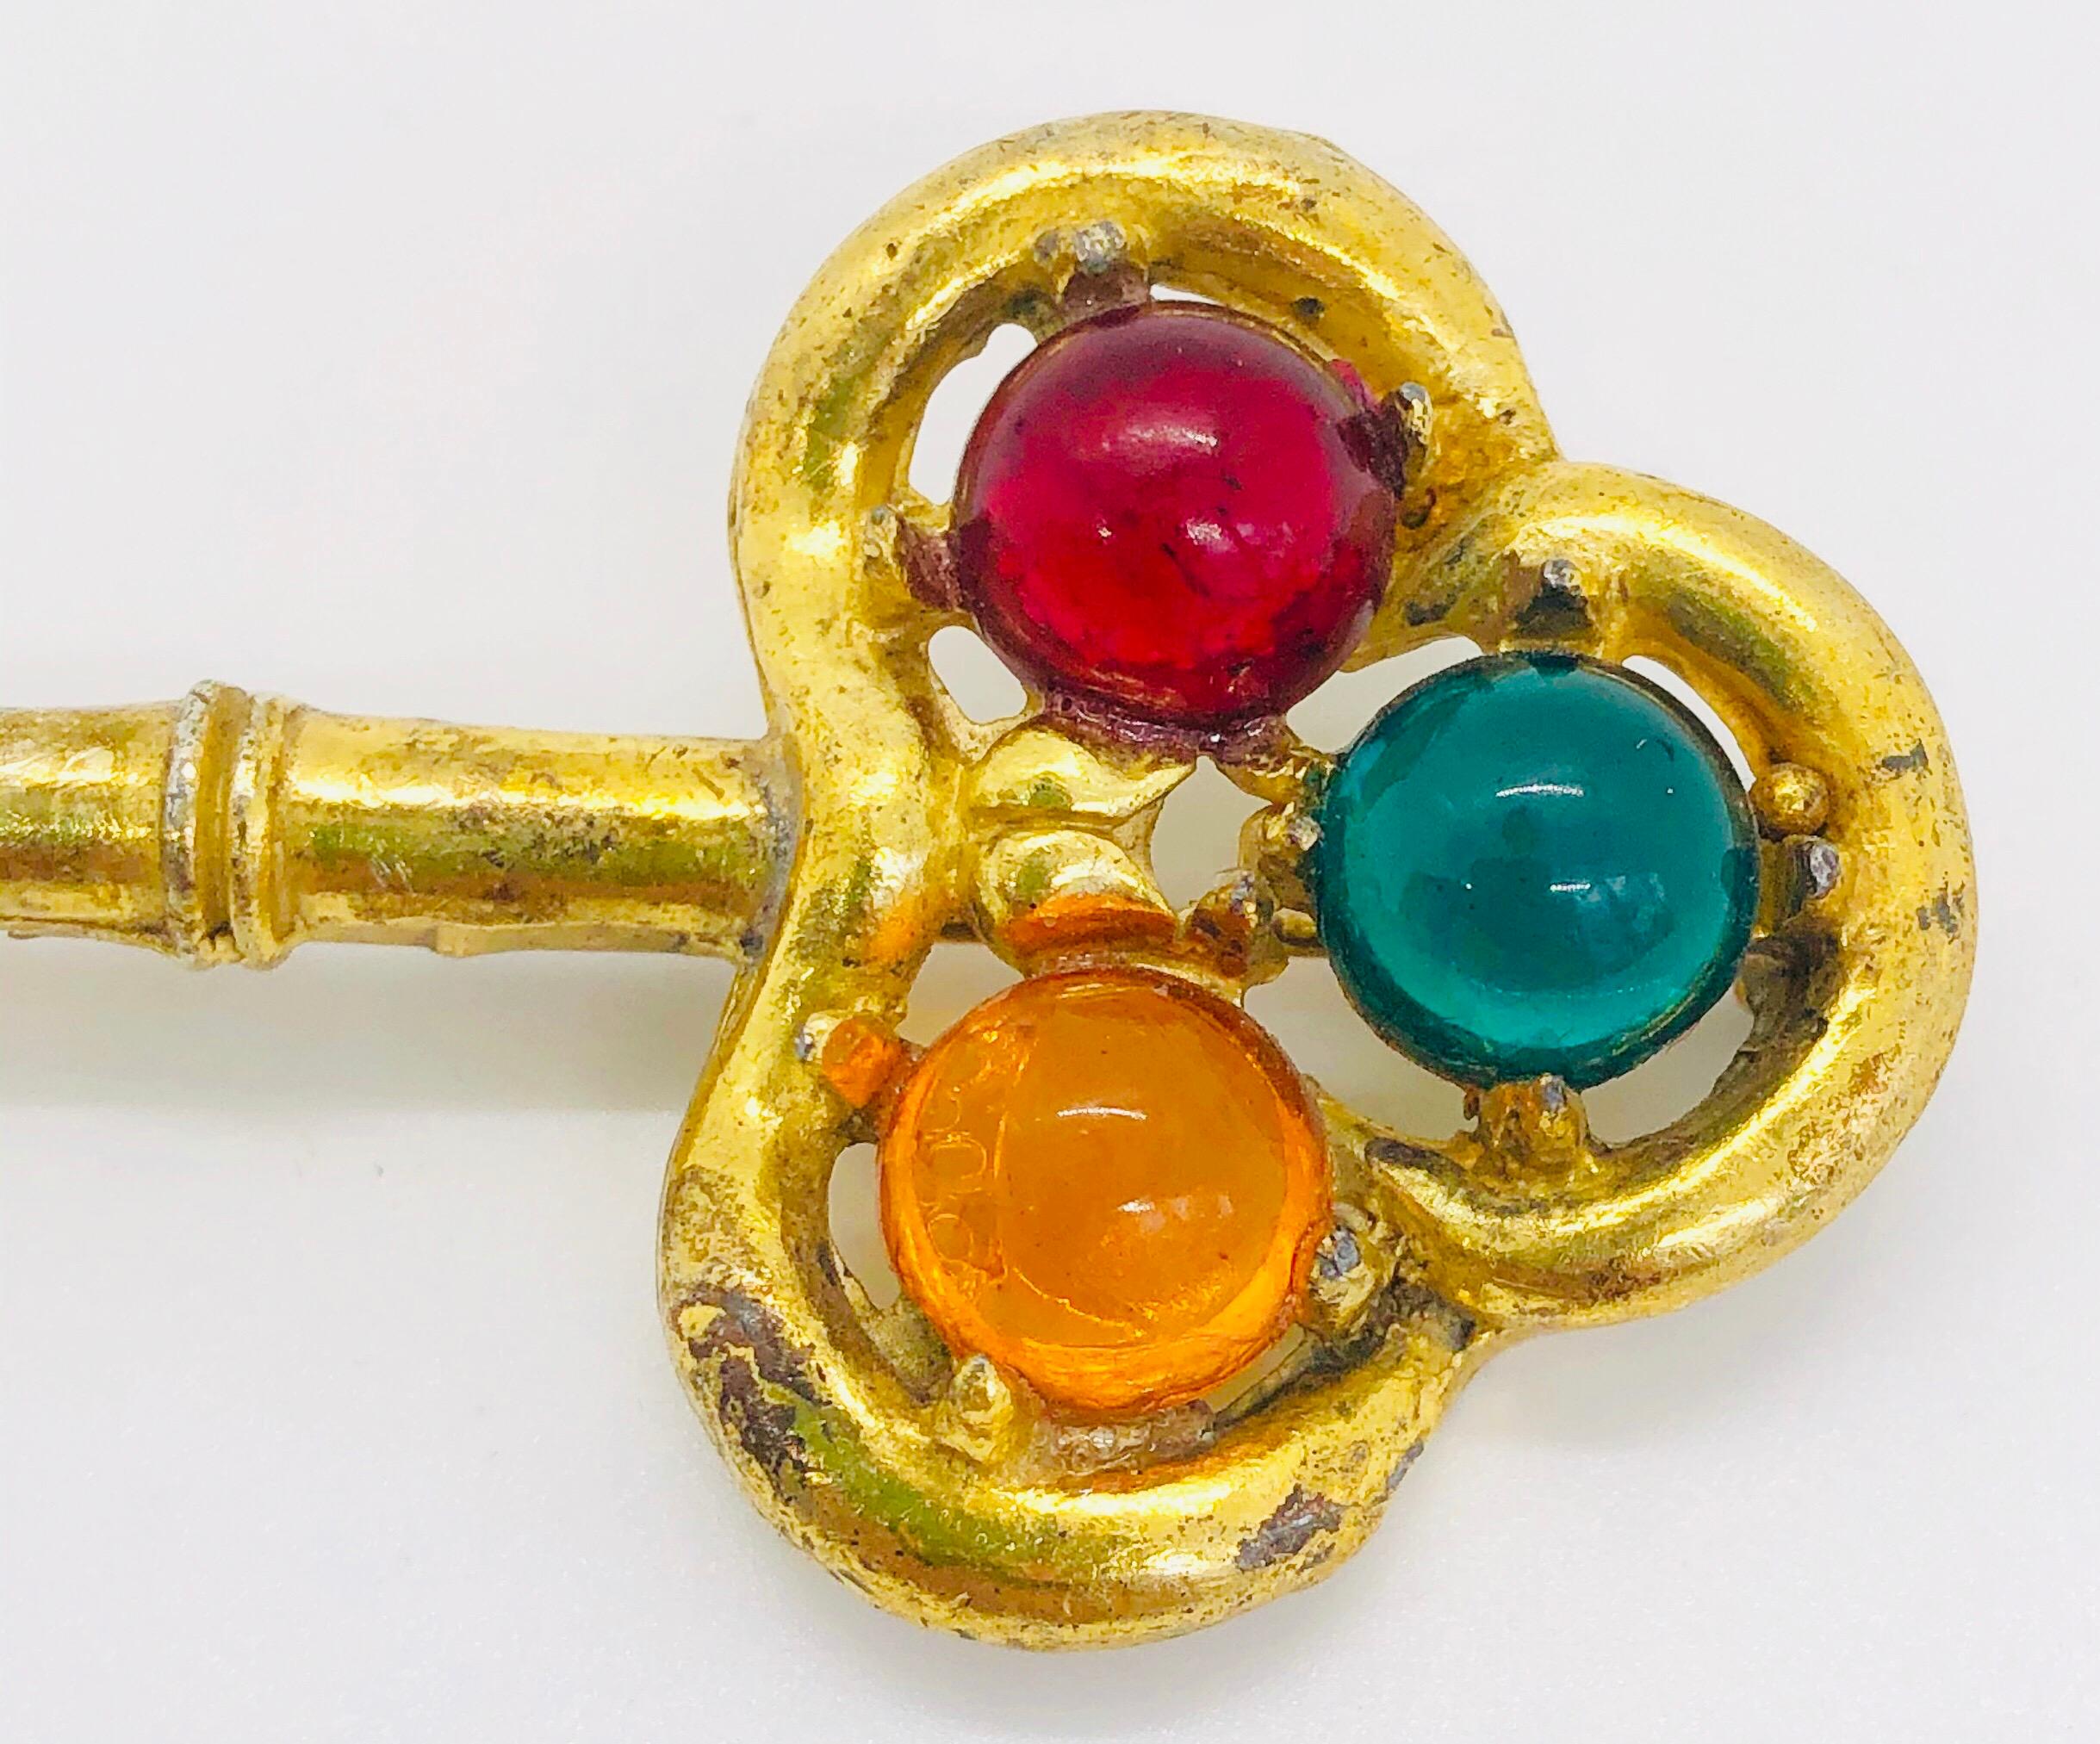 Chic vintage gold gripoix novelty brooch pin ! Features a distressed gold with gripoix glass beads in red, blue, green and marigold orange. Adds sparkle to any outfit. Great on a denim jacket, blazer, sweater or dress.
In great condition
Measures 3